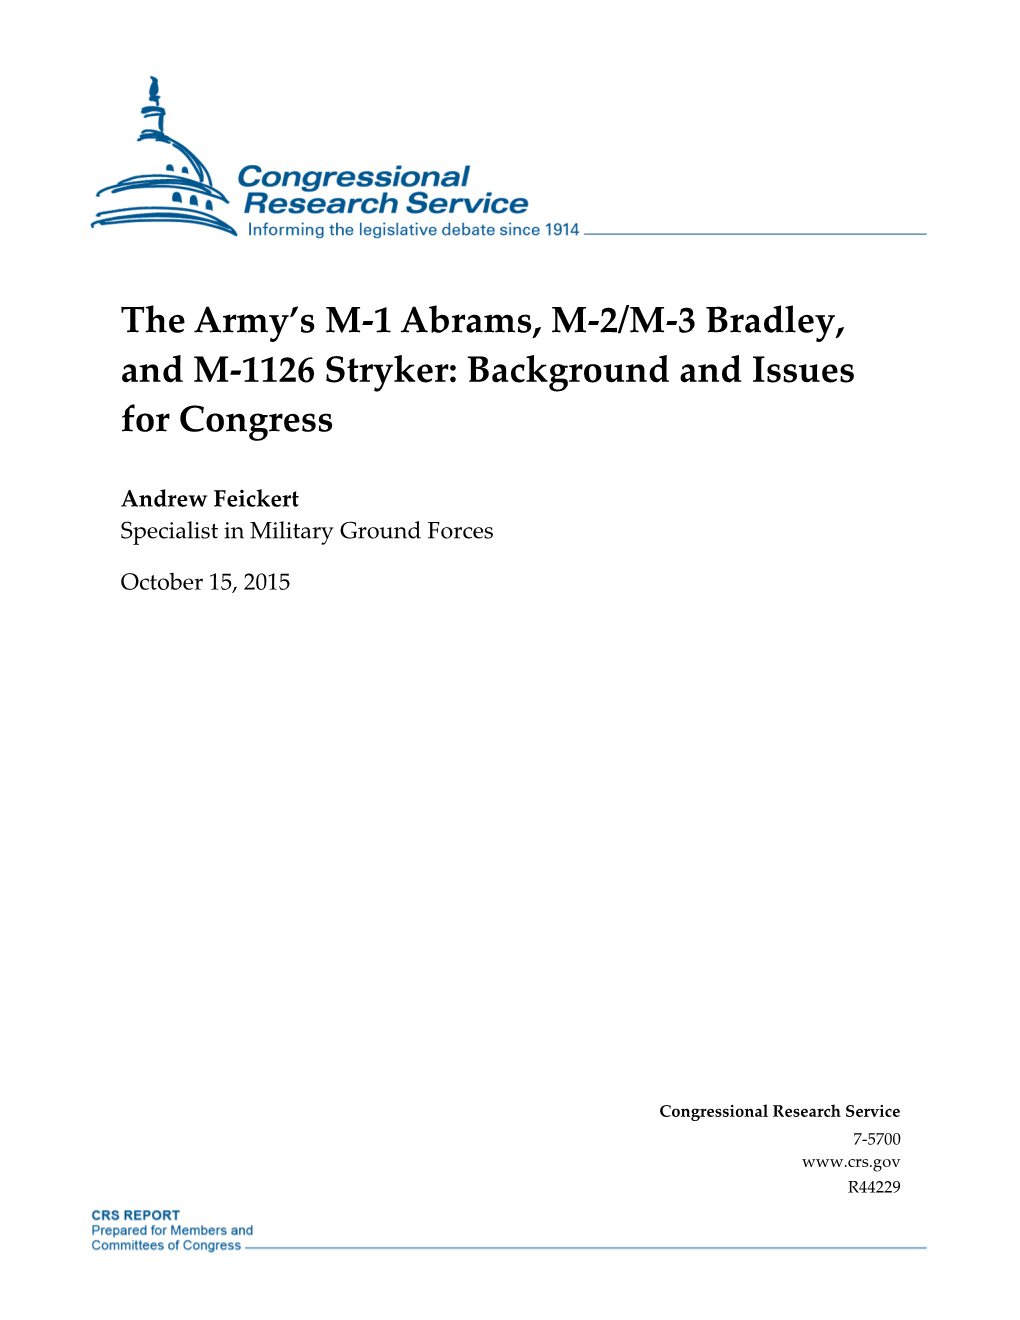 The Army's M-1 Abrams, M-2/M-3 Bradley, and M